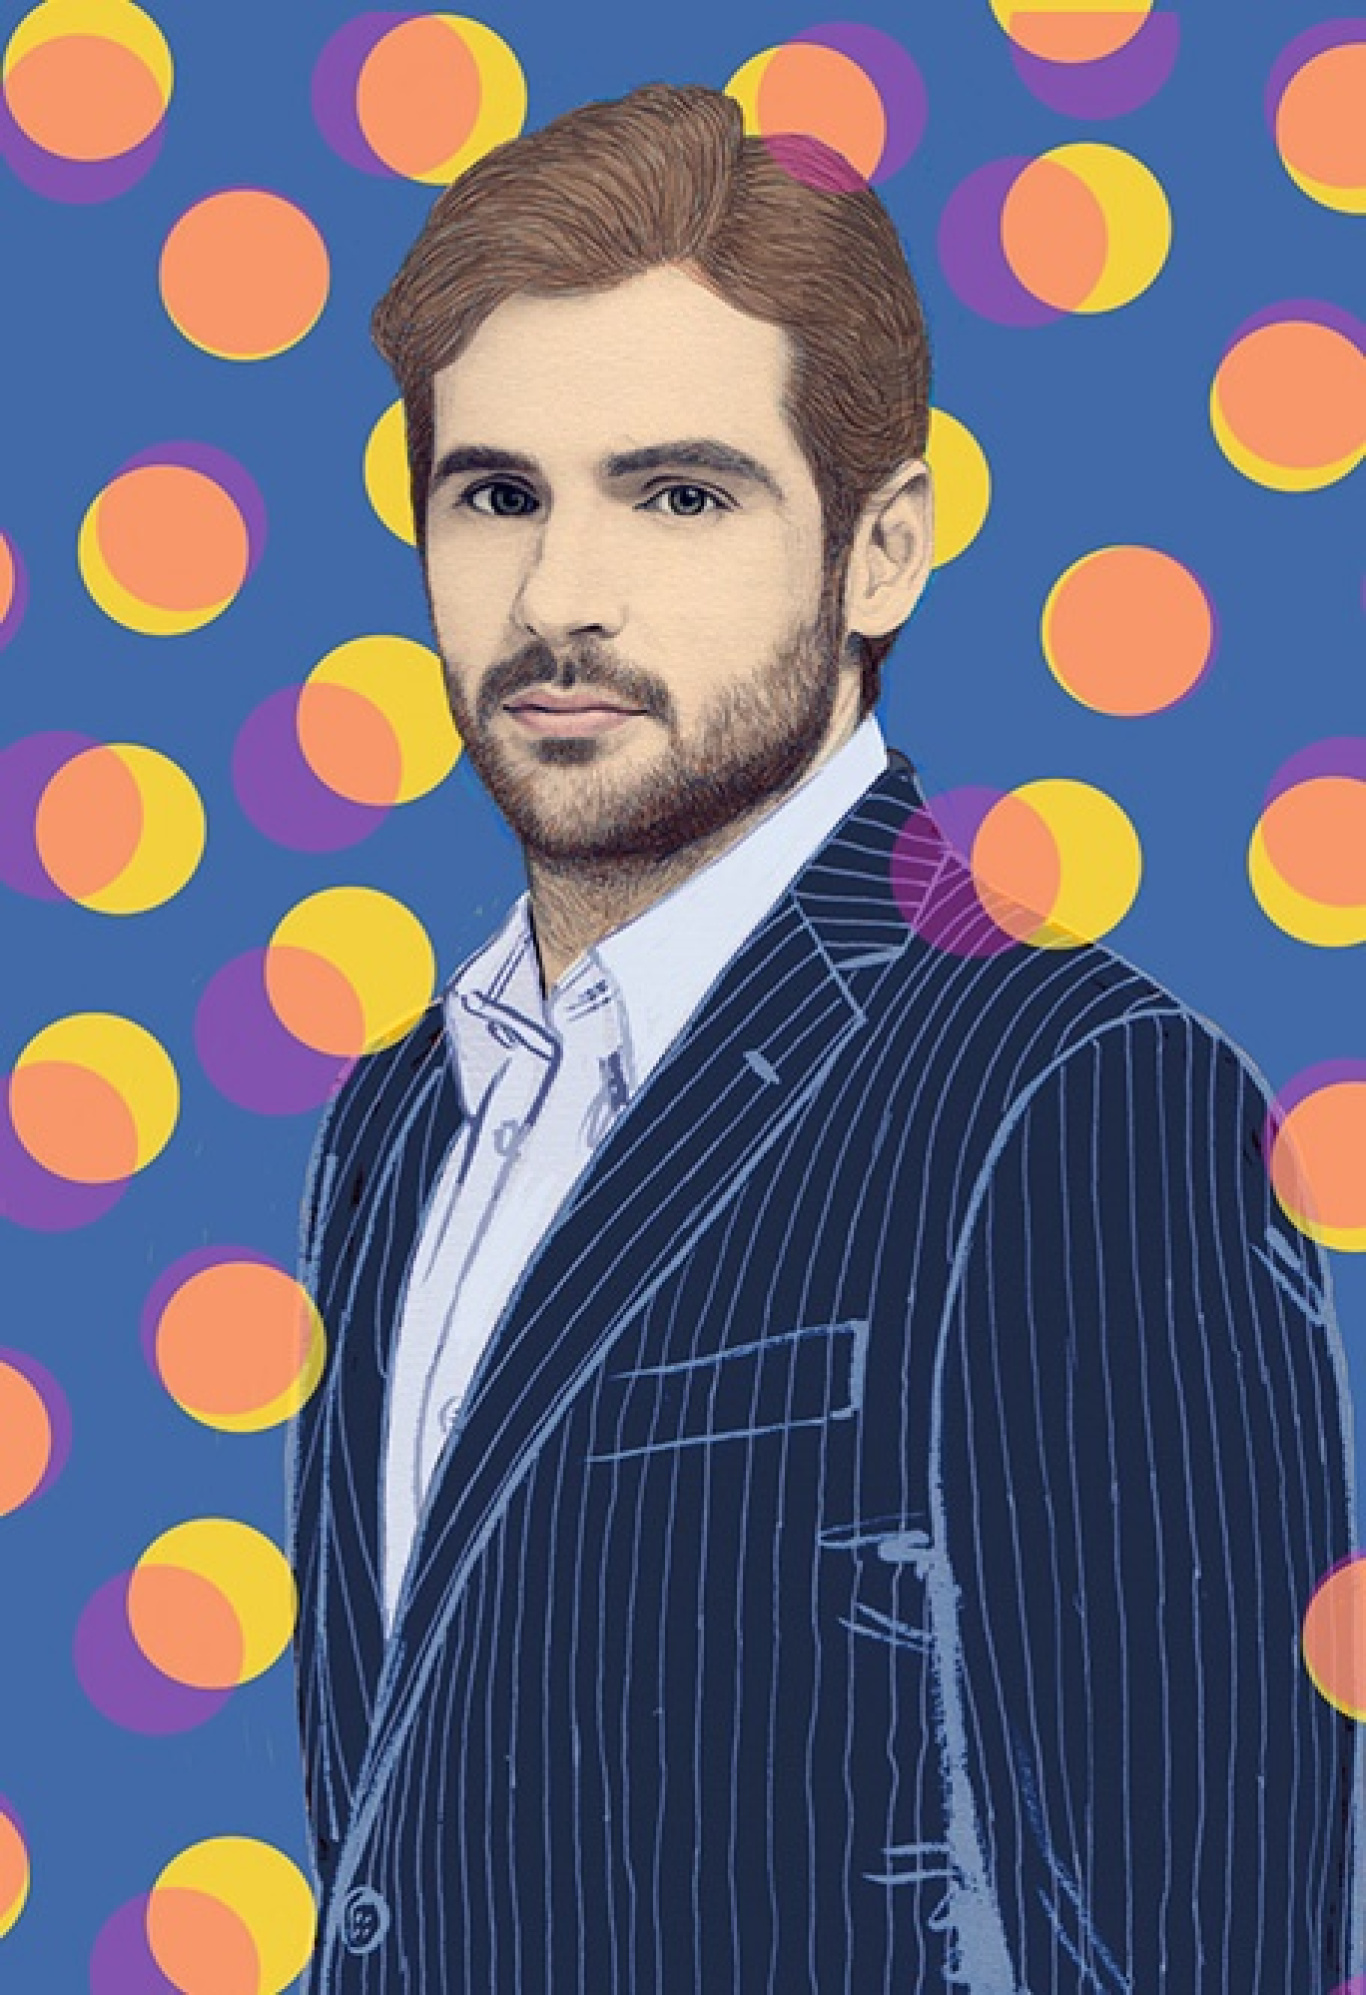 Interview with Tomaso Trussardi - Illustration by Anna Higgie